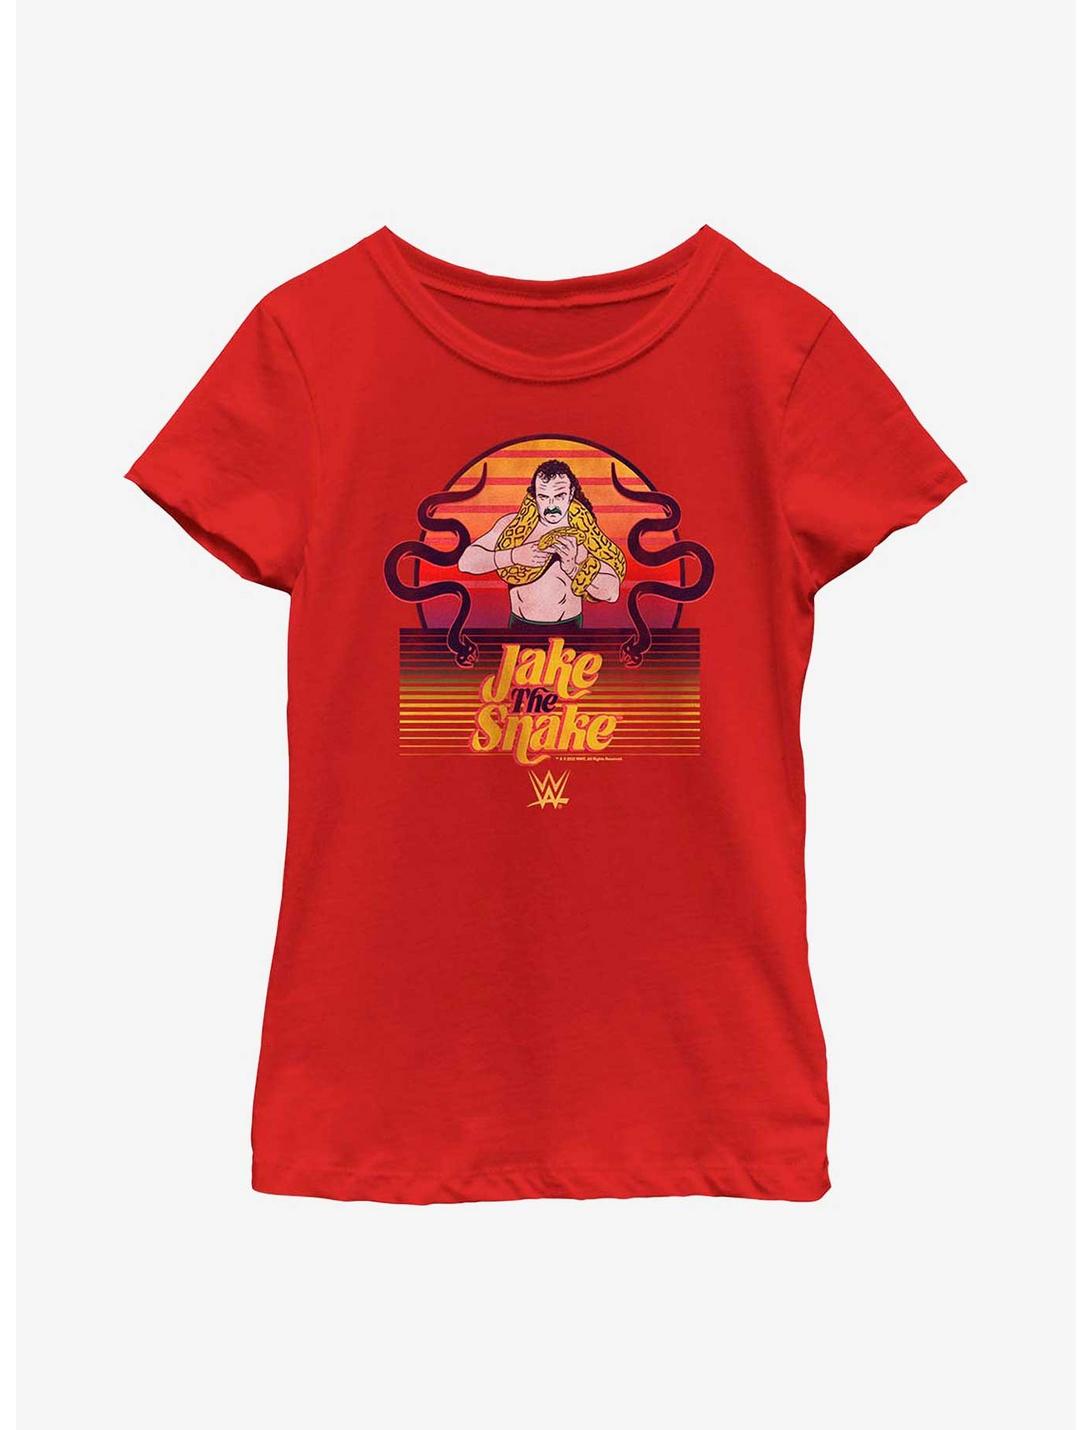 WWE Jake The Snake Sunset Youth Girls T-Shirt, RED, hi-res